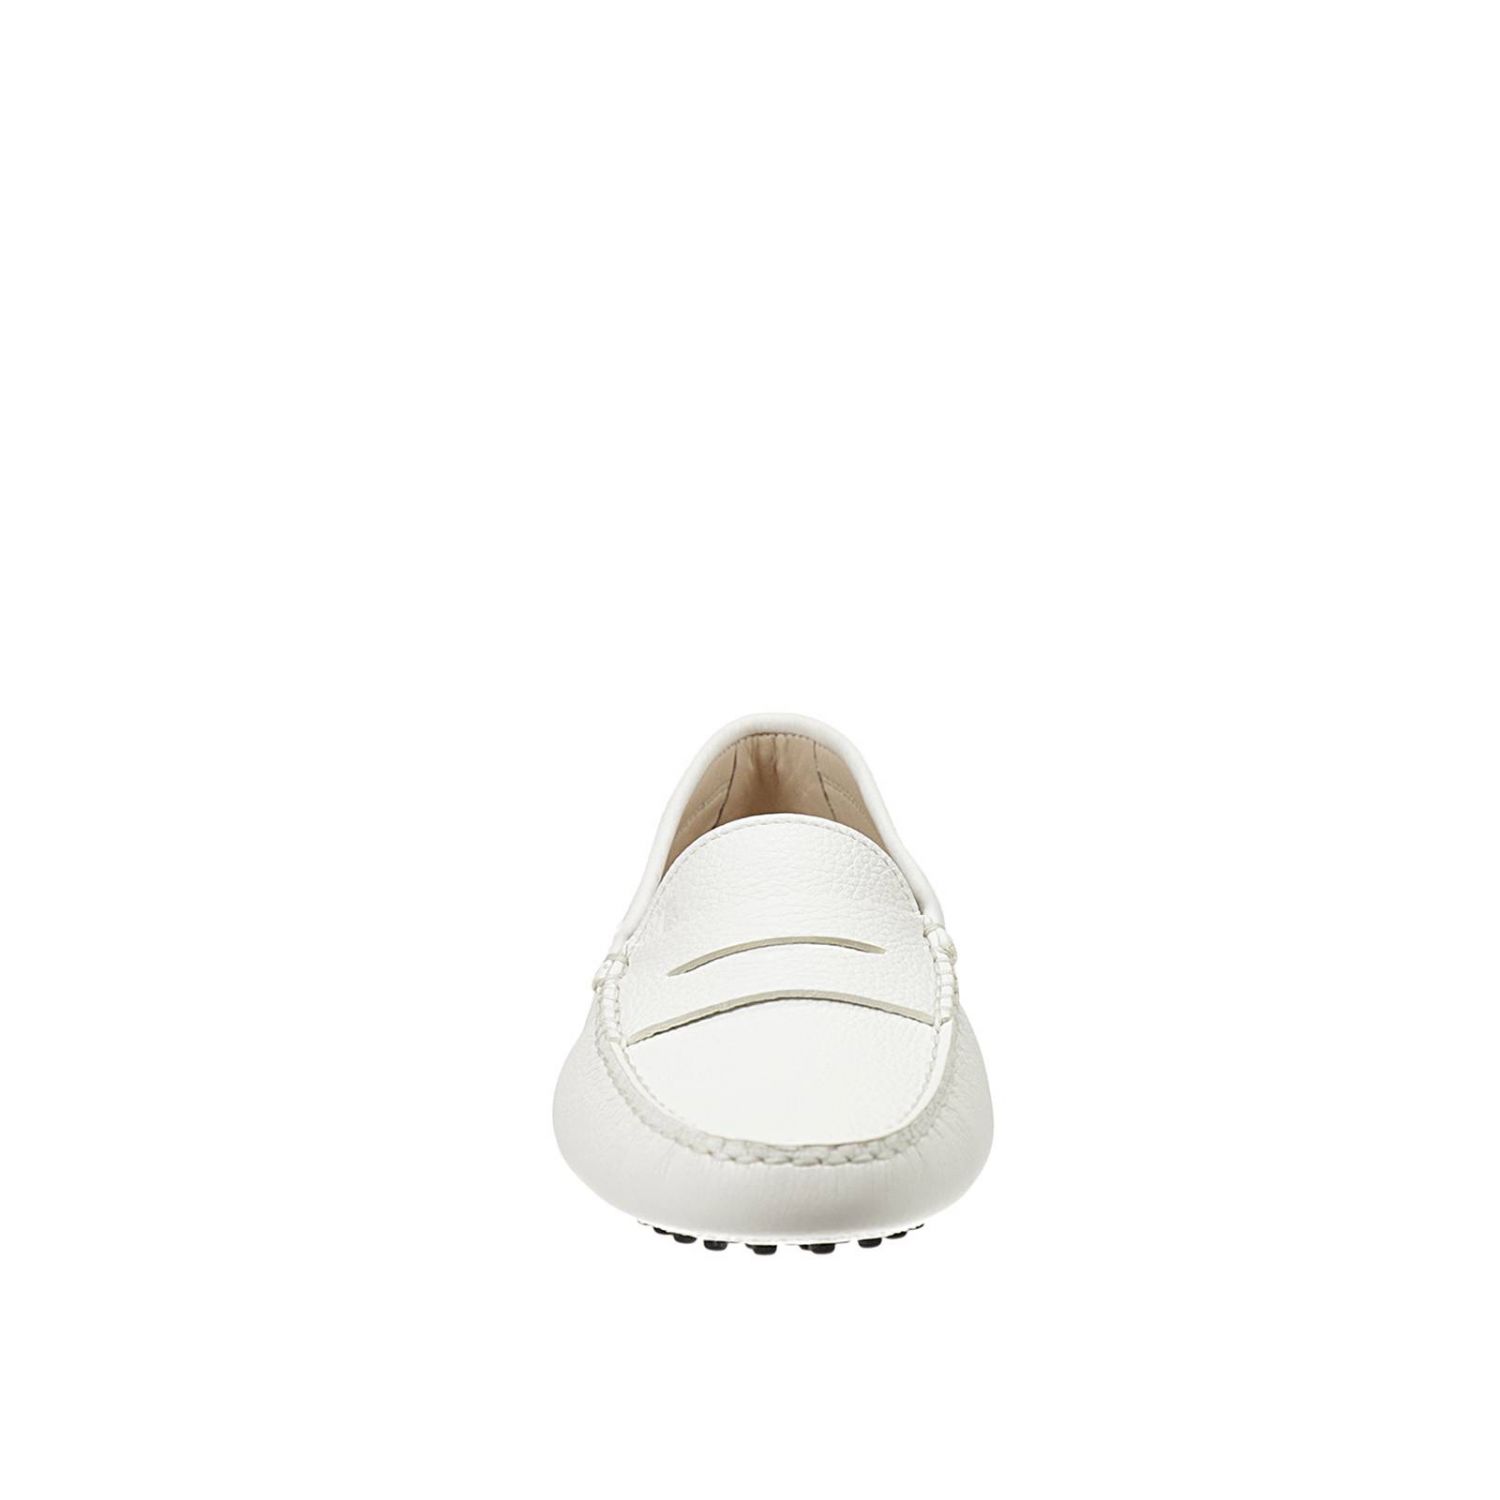 TODS: | Flat Shoes Tods Women White | Flat Shoes Tods xxw00g00010 5j1 ...